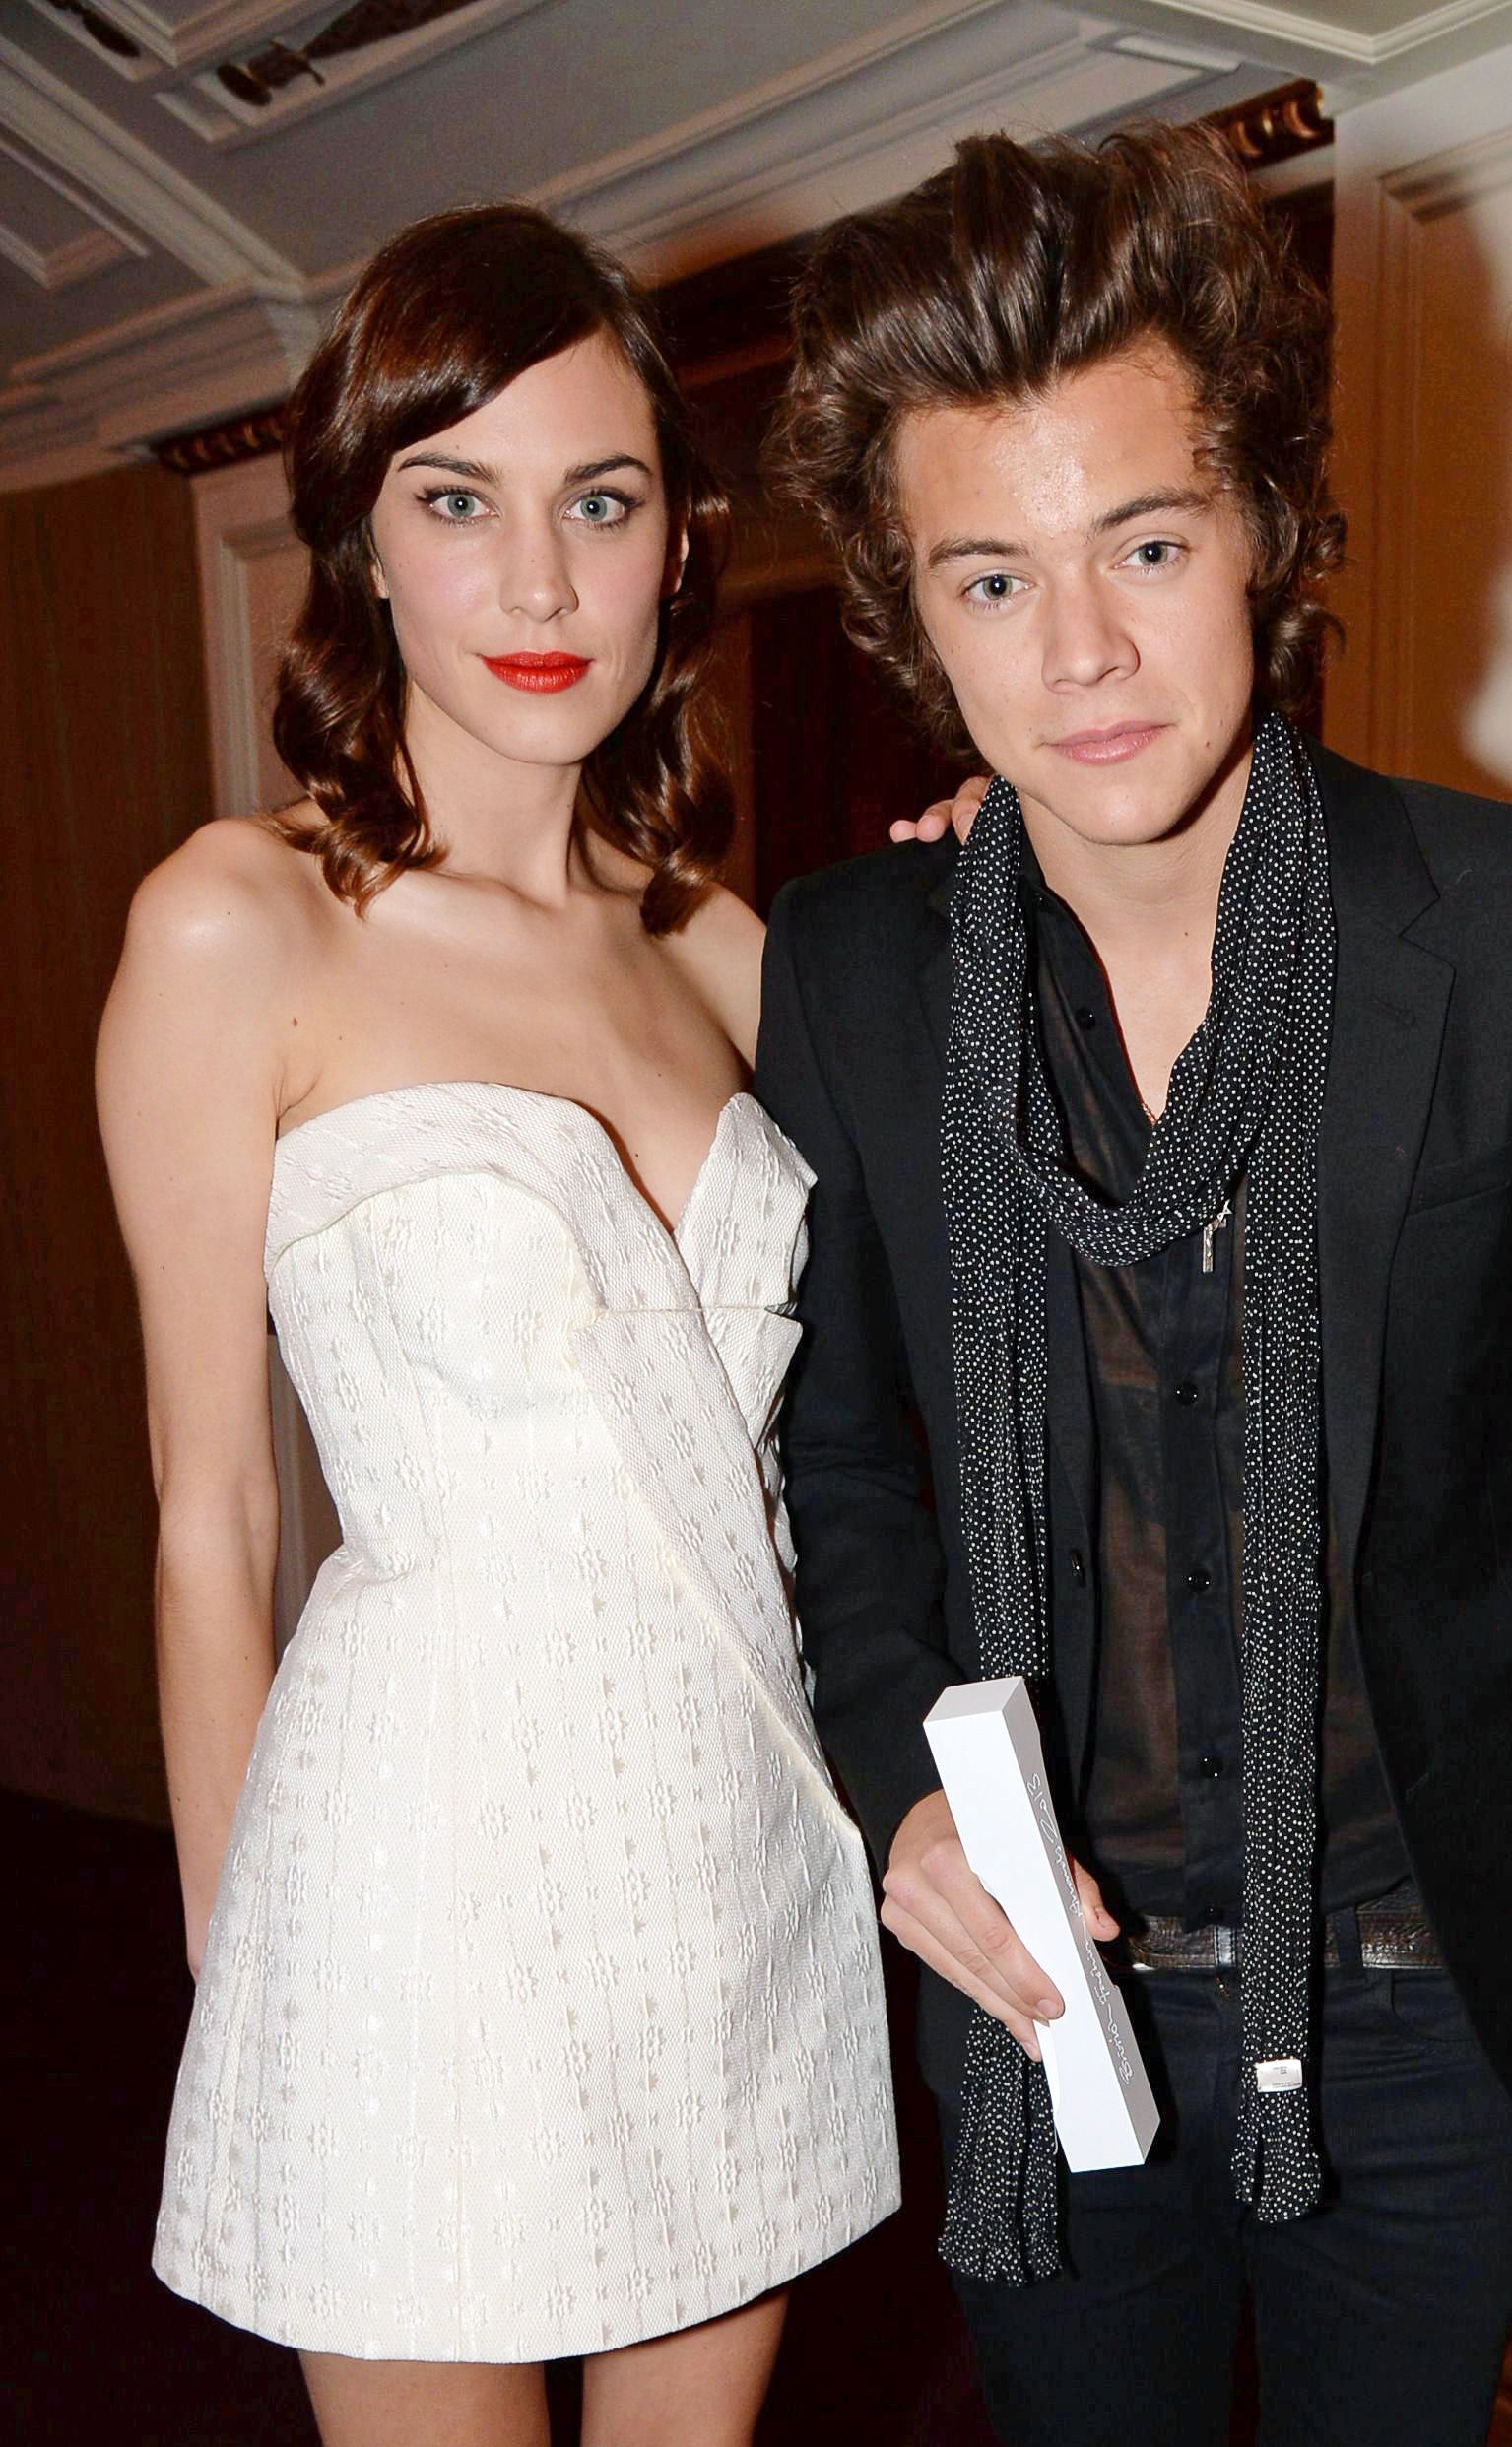 Harry Styles Ex Girlfriends Past Relationships 21 ?fit=1200%2C1942